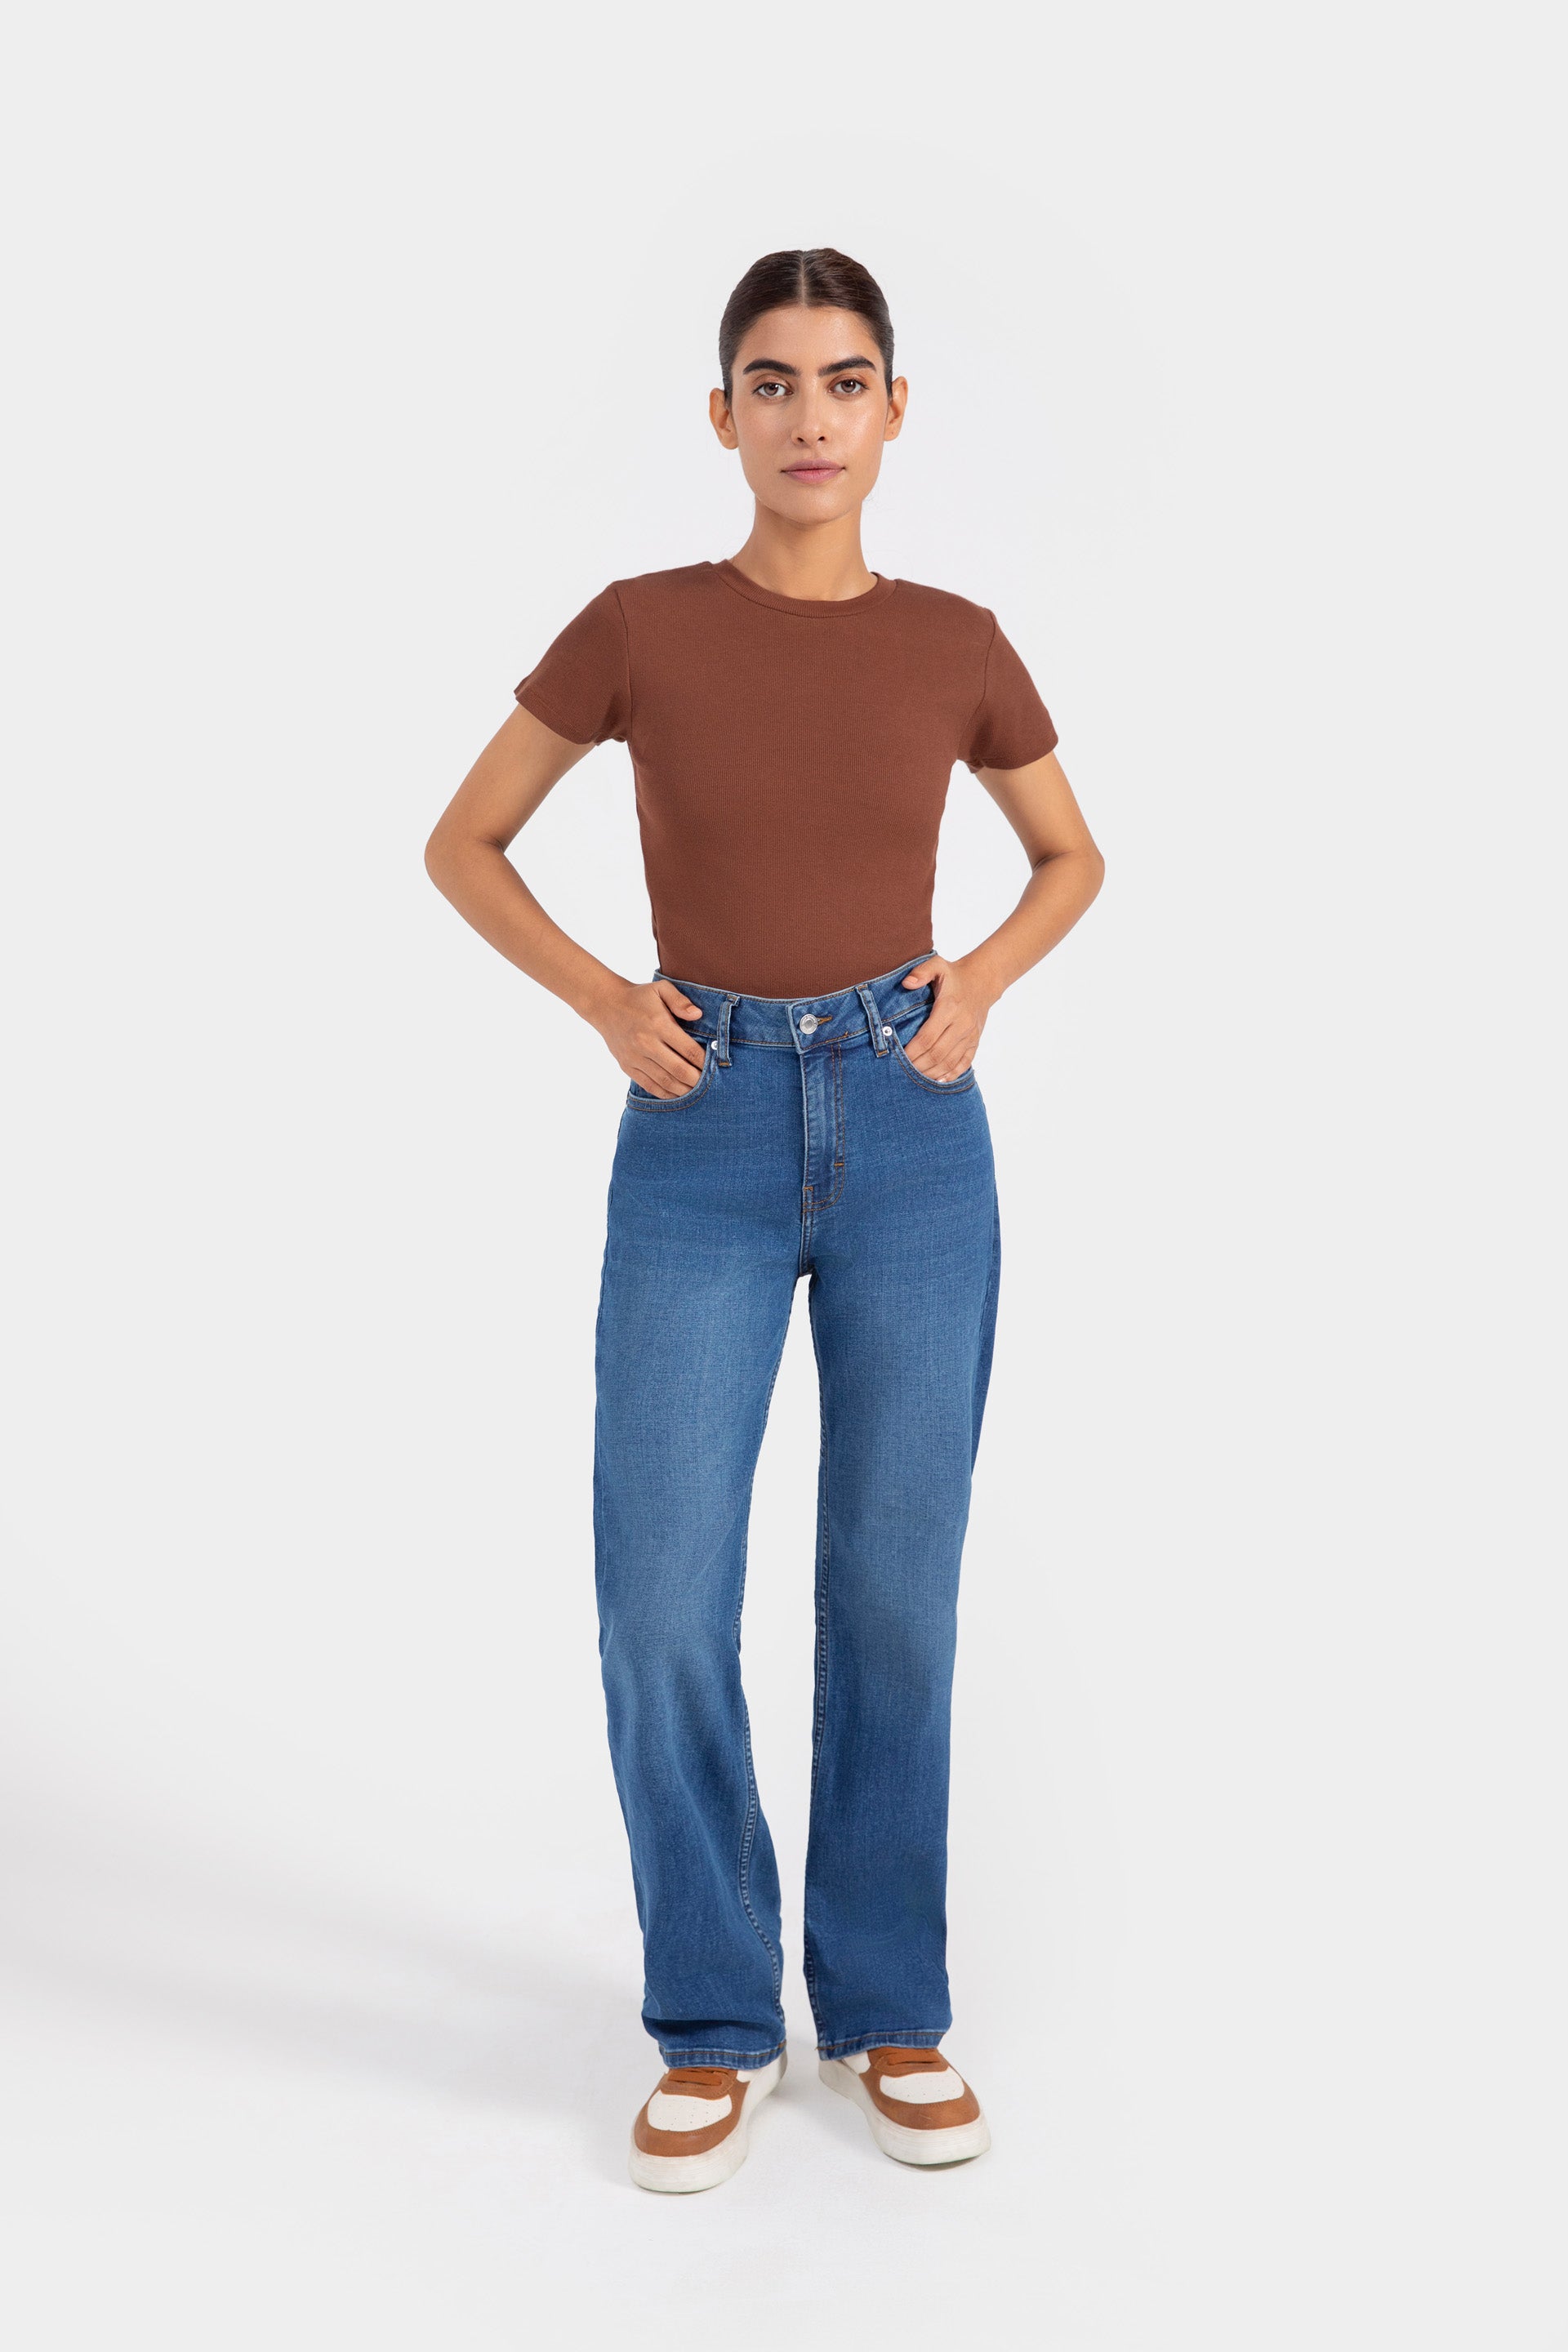 Low-Rise Bootcut Jeans